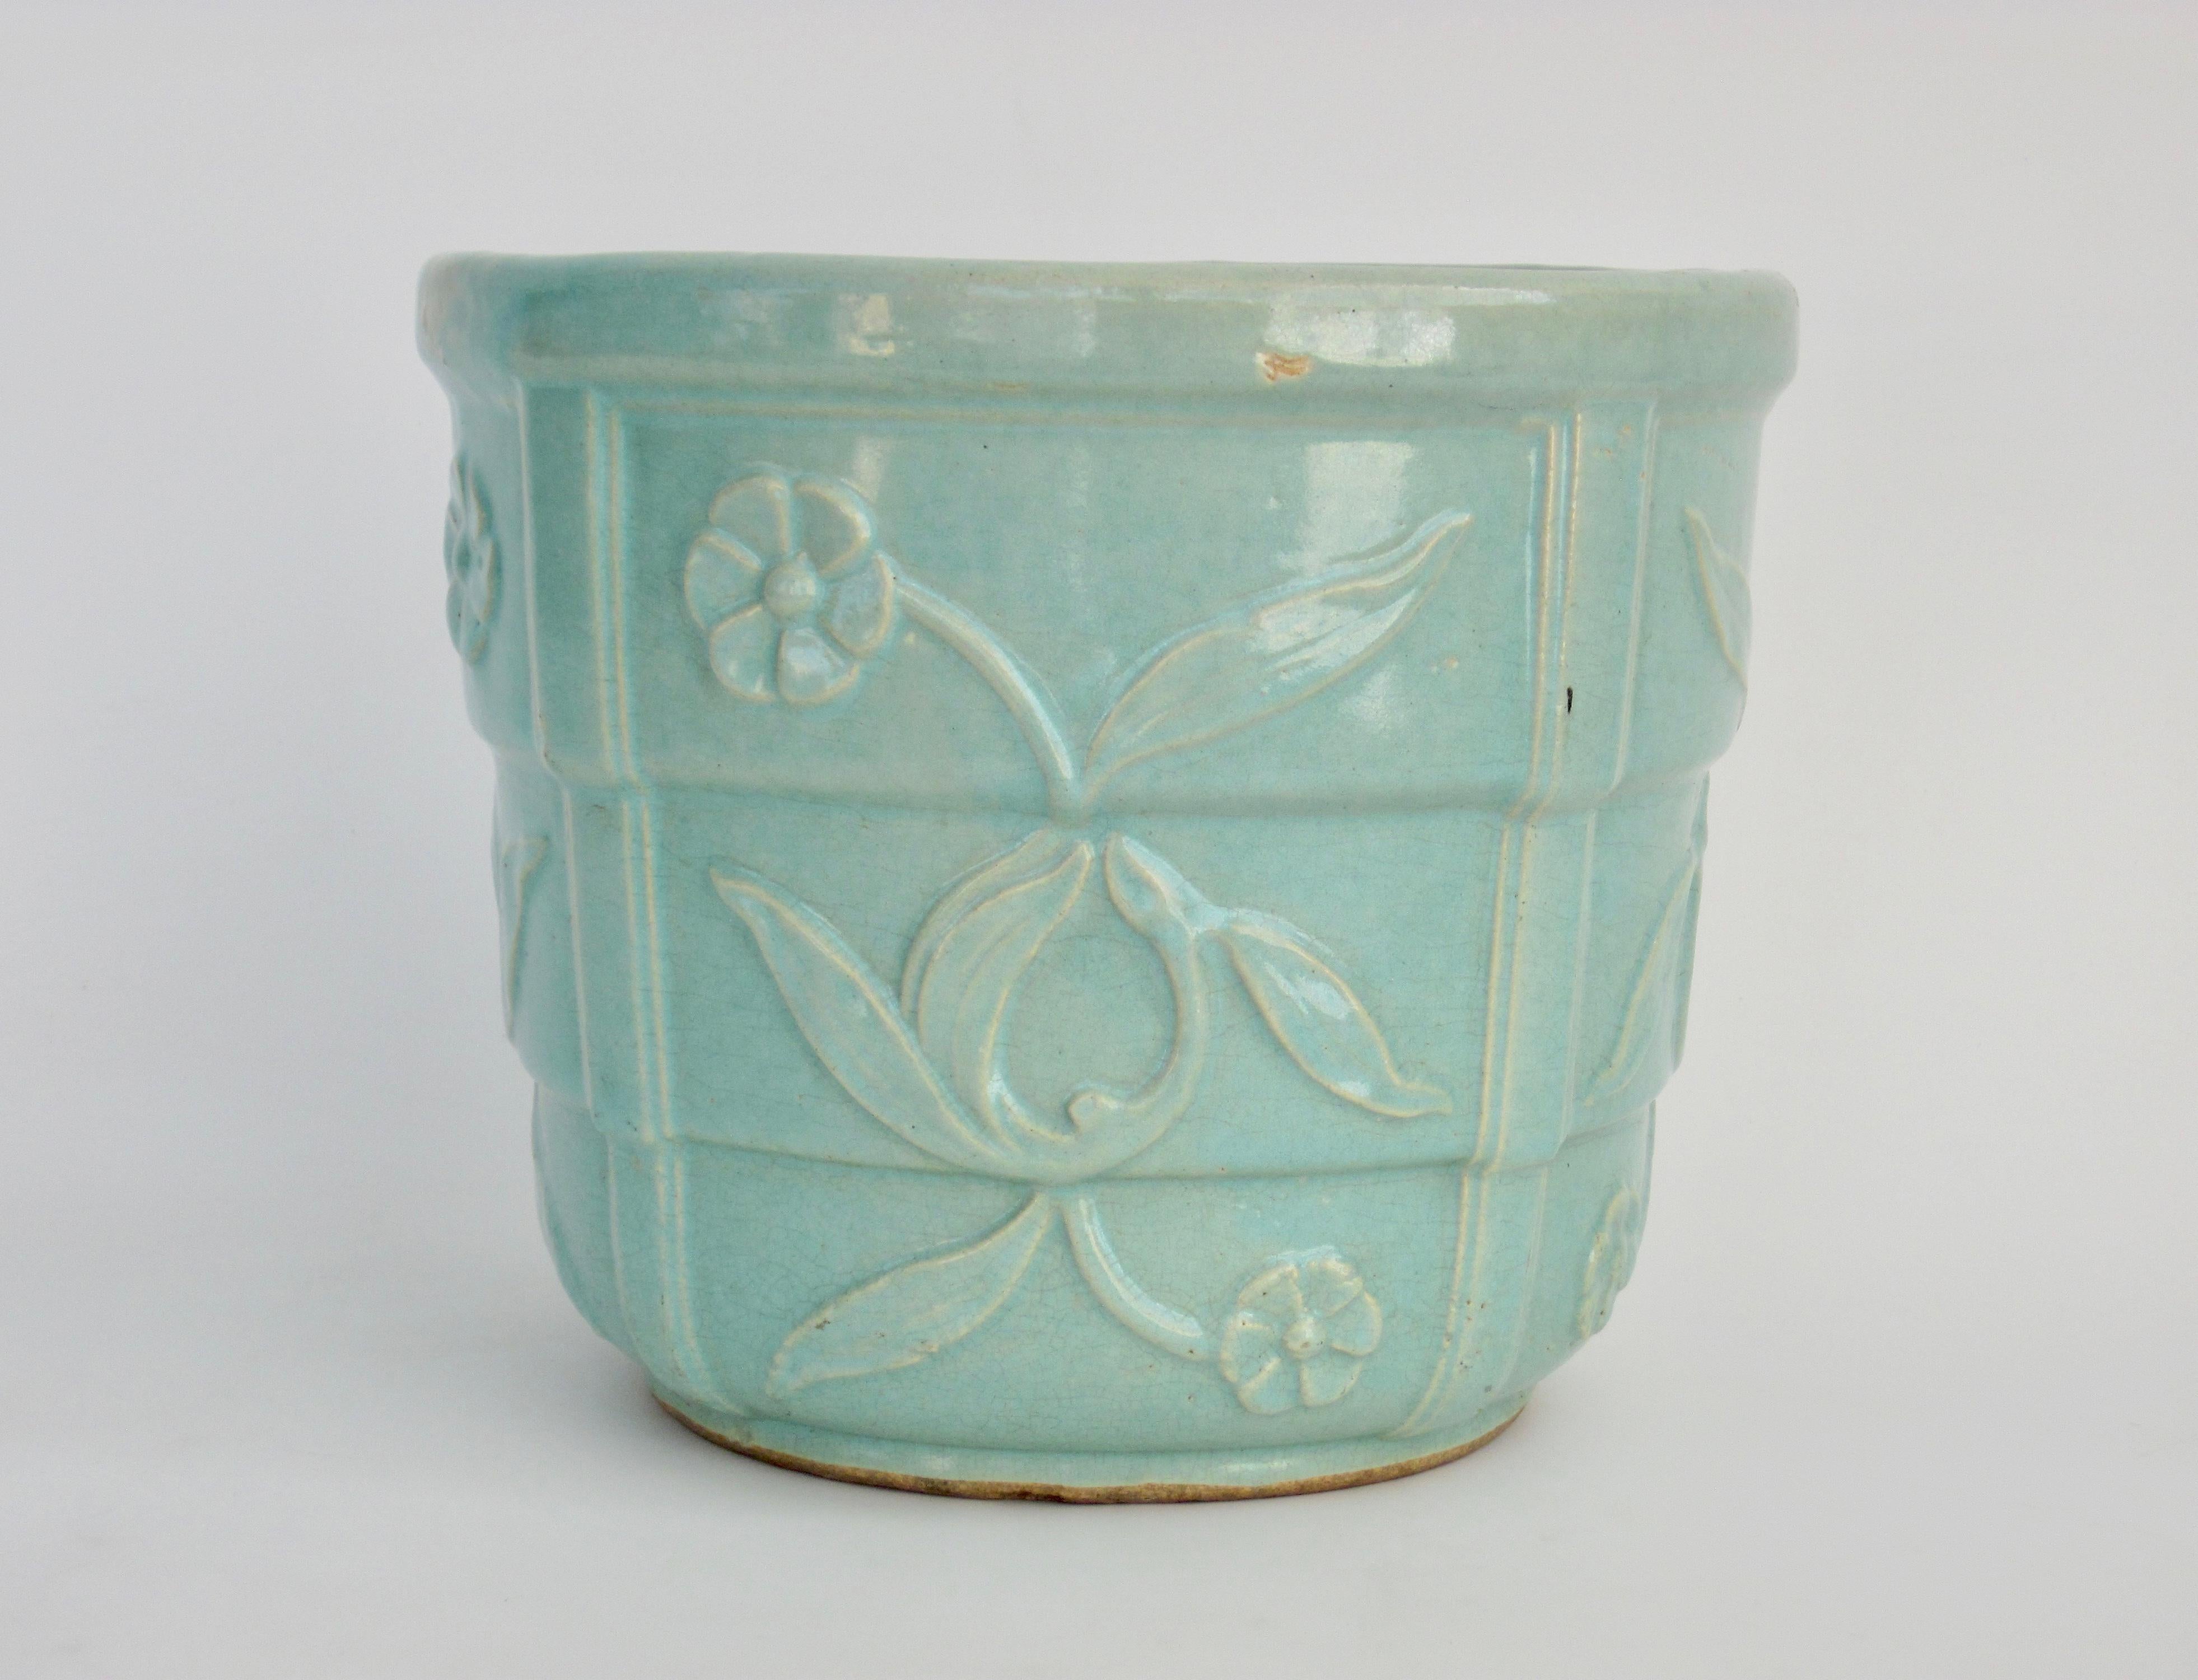 Robinson Ransbottom Pottery blue-green art deco style stepped flower pot. Interior dimension measures 9.5